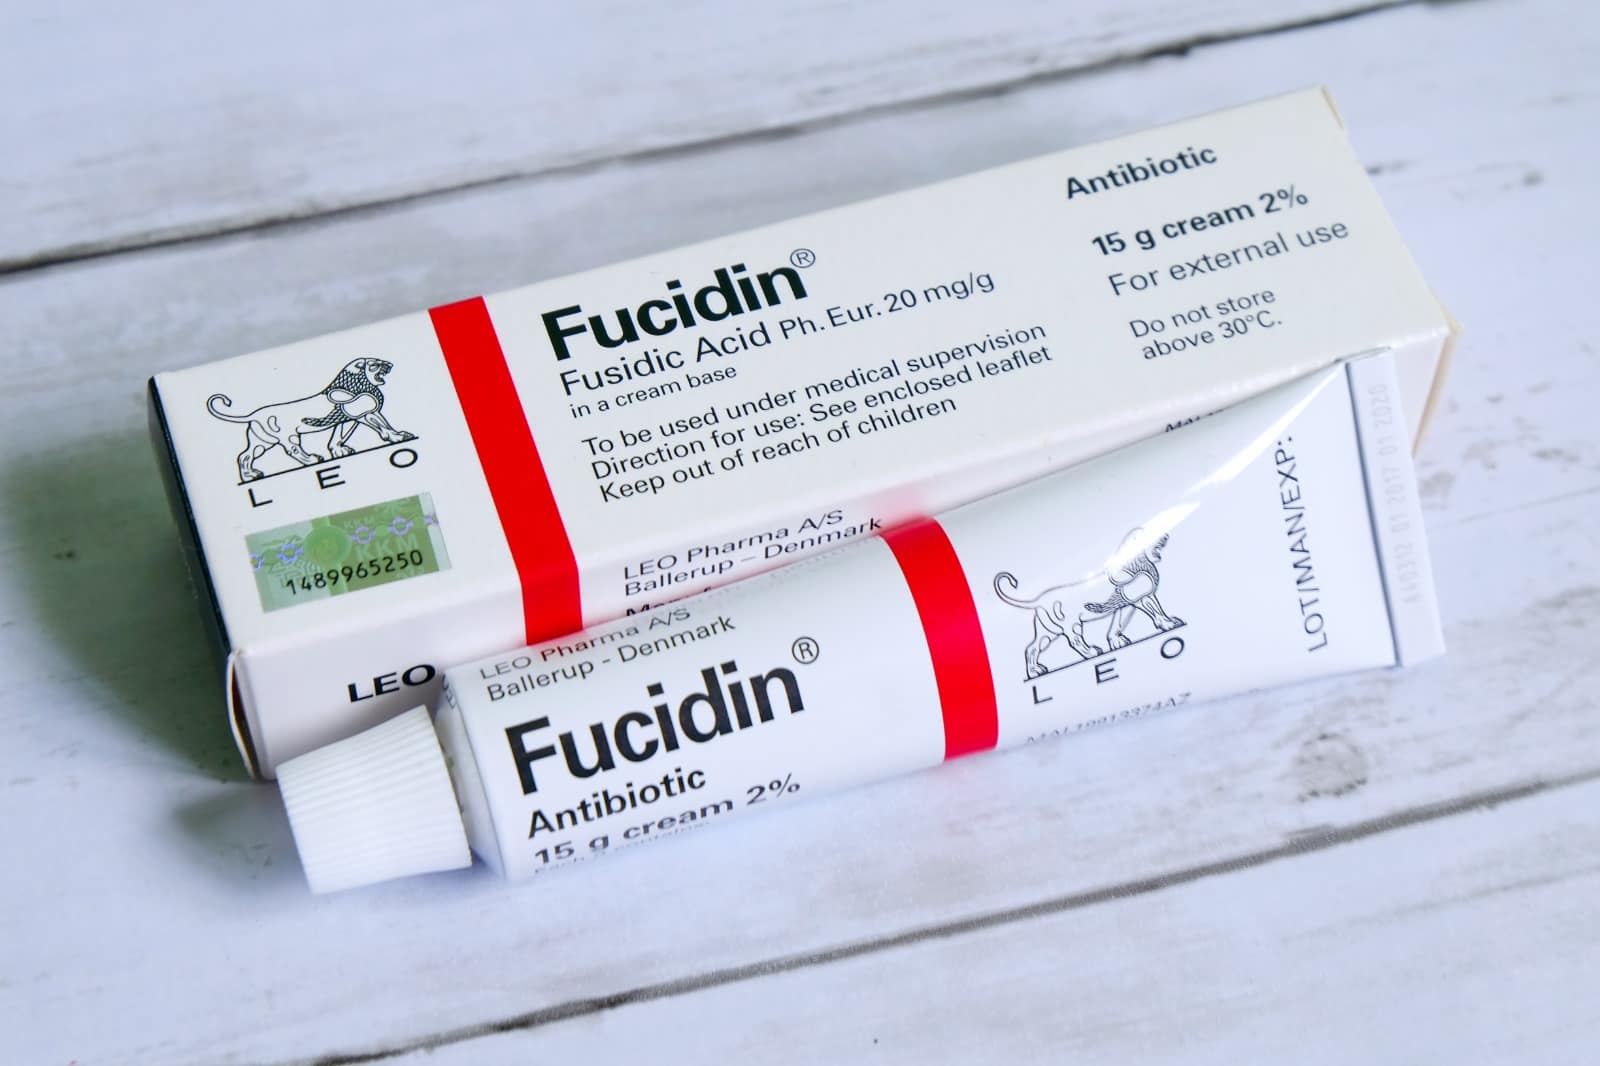 Fucidin cream: Effective solution for bacterial skin infections